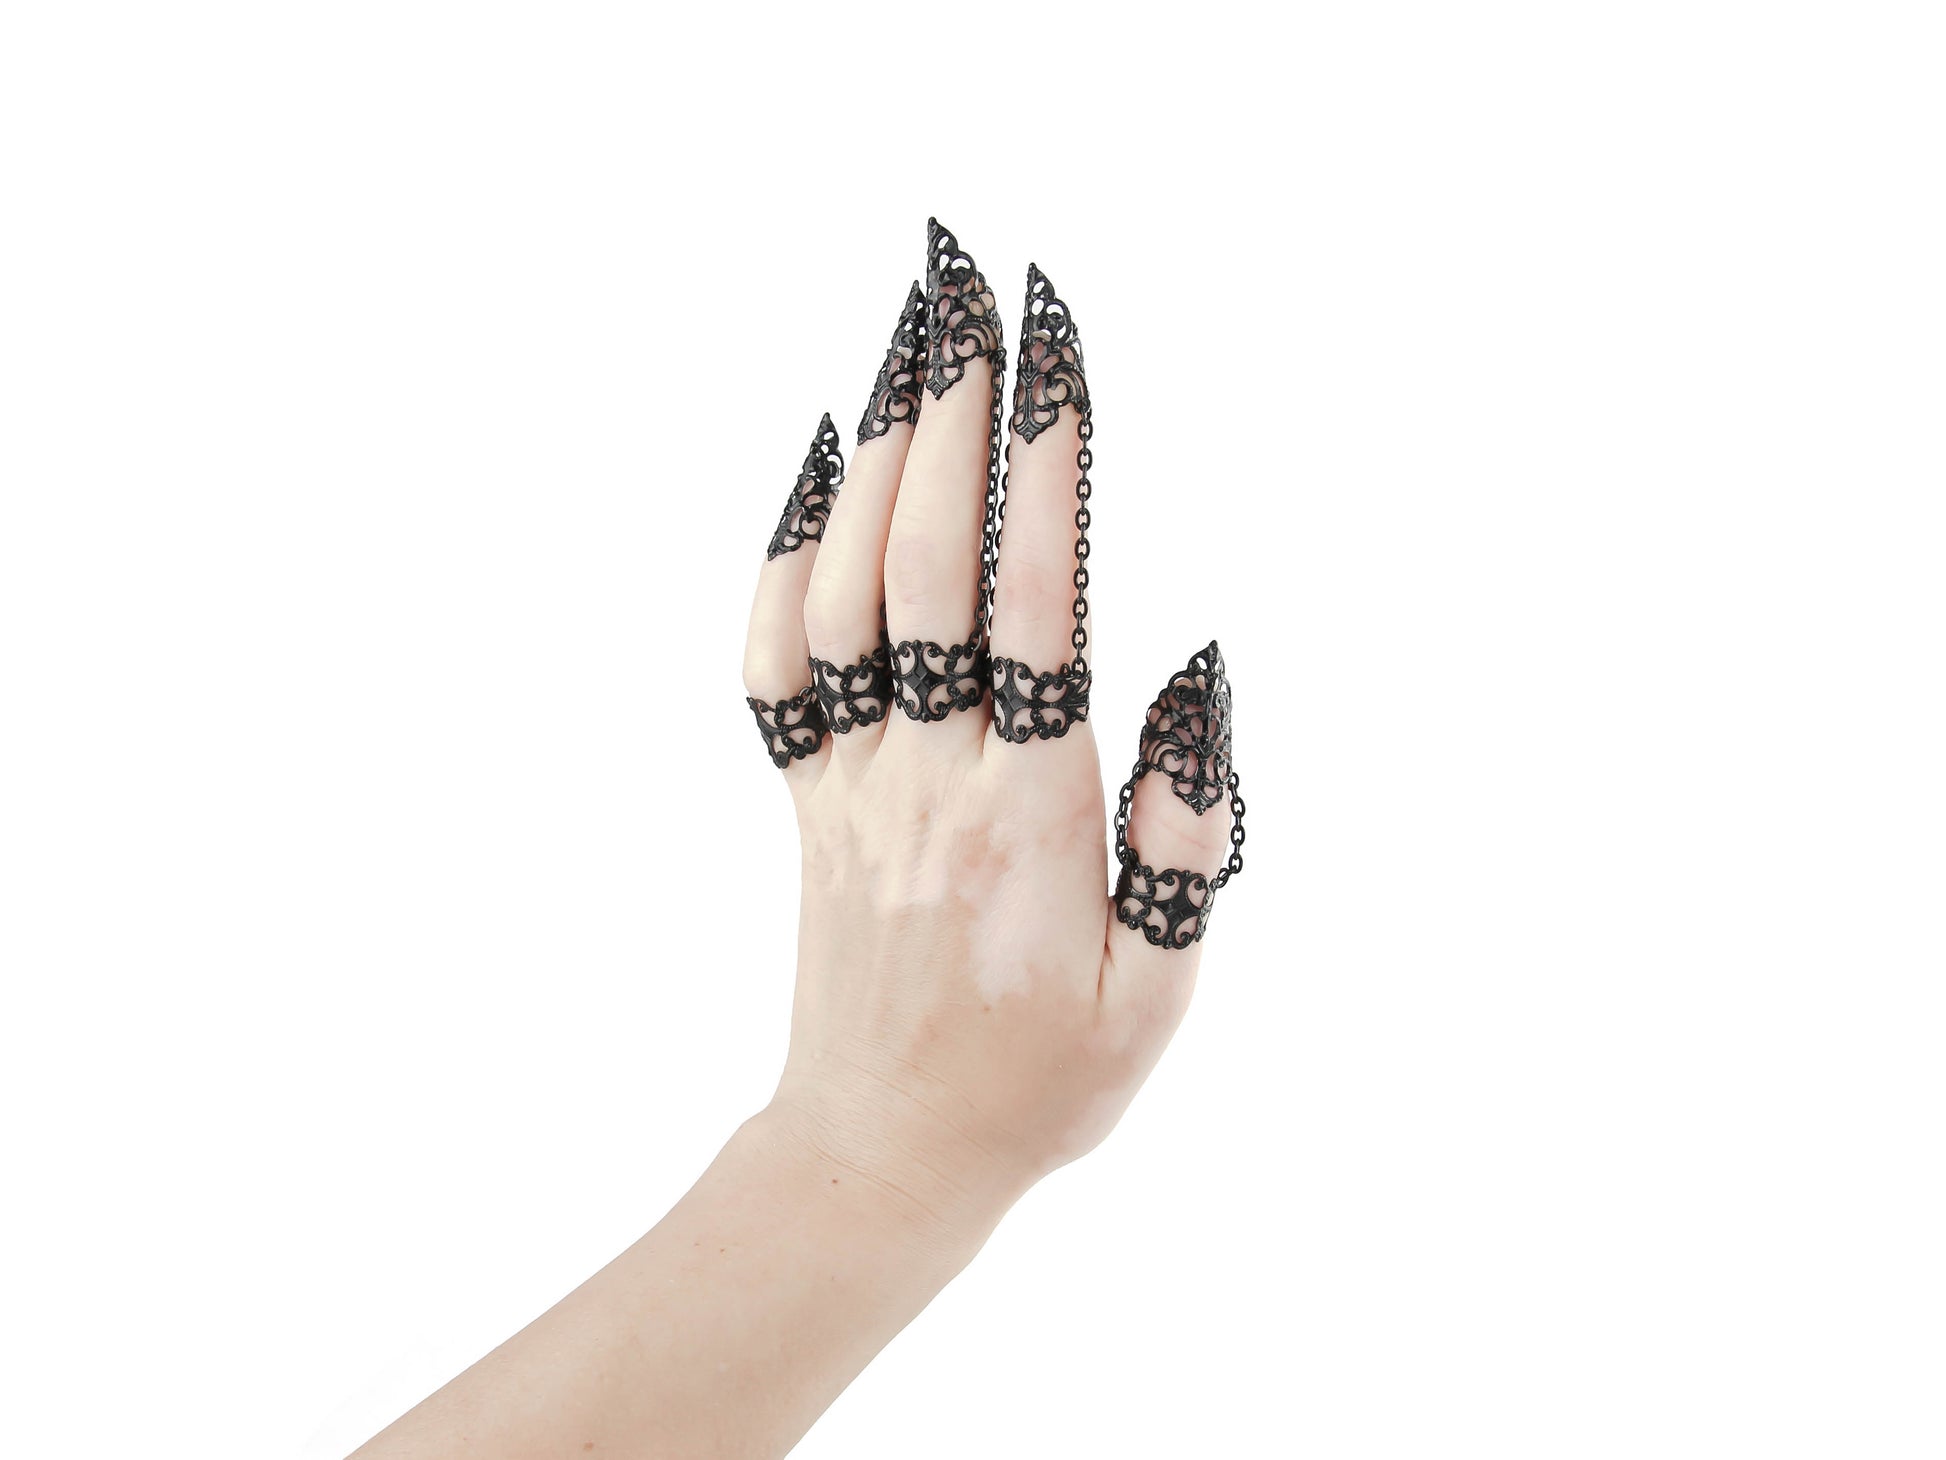  A sophisticated full hand set of Myril Jewels claw rings, exquisitely designed for the dark-avantgarde enthusiast. The intricate filigree work of the black rings creates a stunning contrast that captures the essence of Neo Gothic style. Ideal for gothic-chic attire, Witchcore ensembles, or as a striking addition to minimal goth daily wear. This set is a perfect choice for those seeking standout Halloween or festival jewelry, embodying the bold spirit of punk and rave party fashion